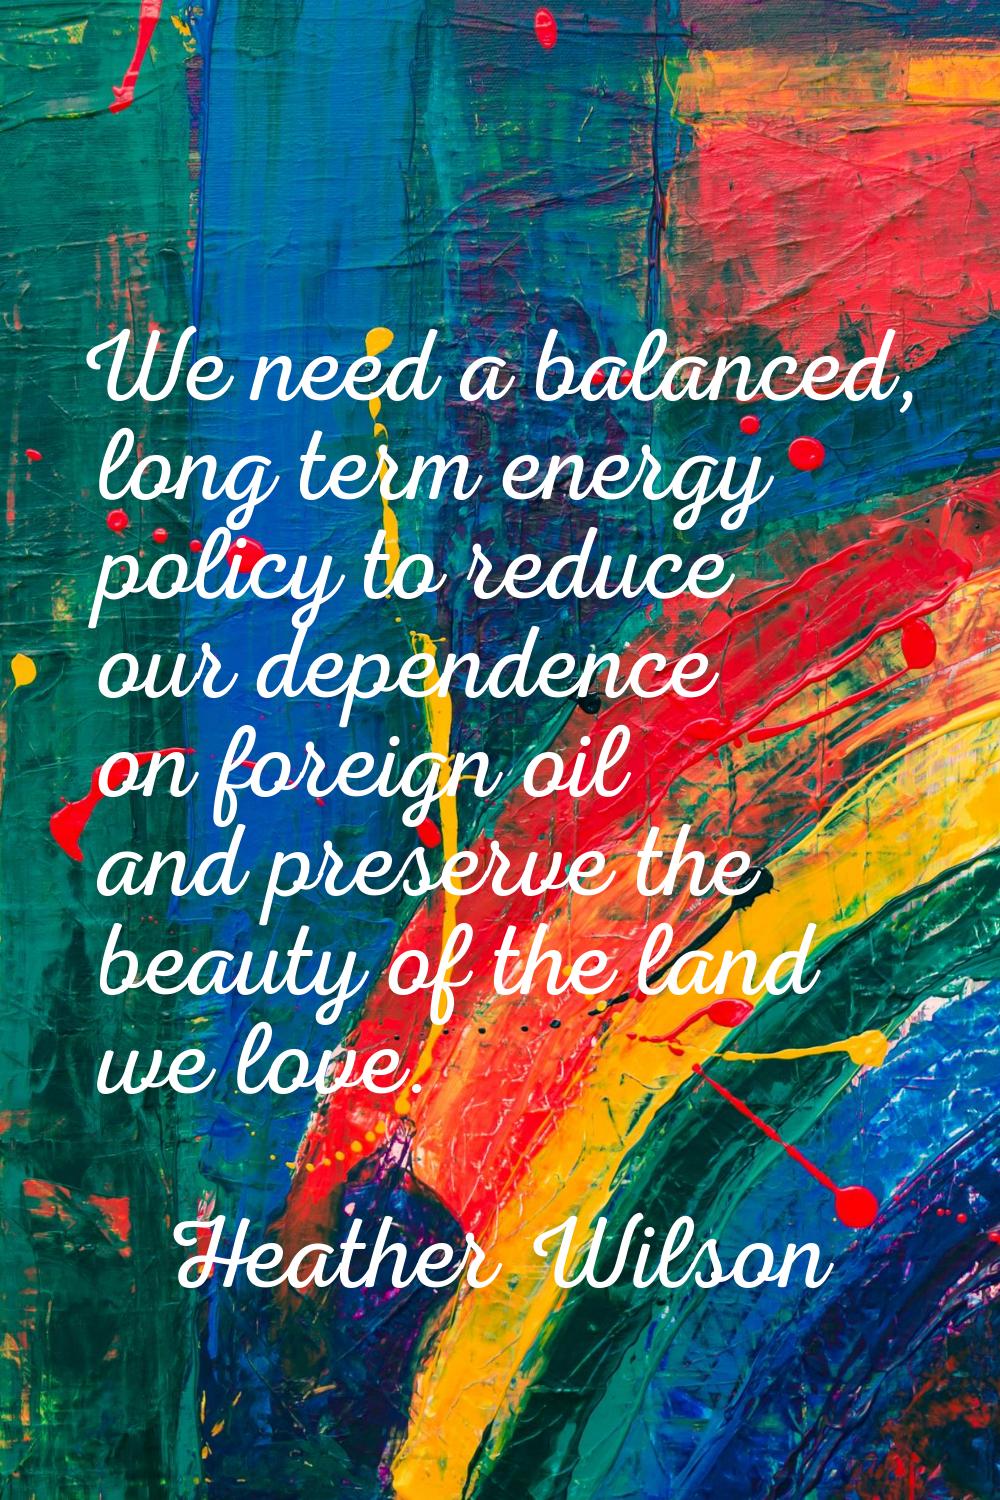 We need a balanced, long term energy policy to reduce our dependence on foreign oil and preserve th